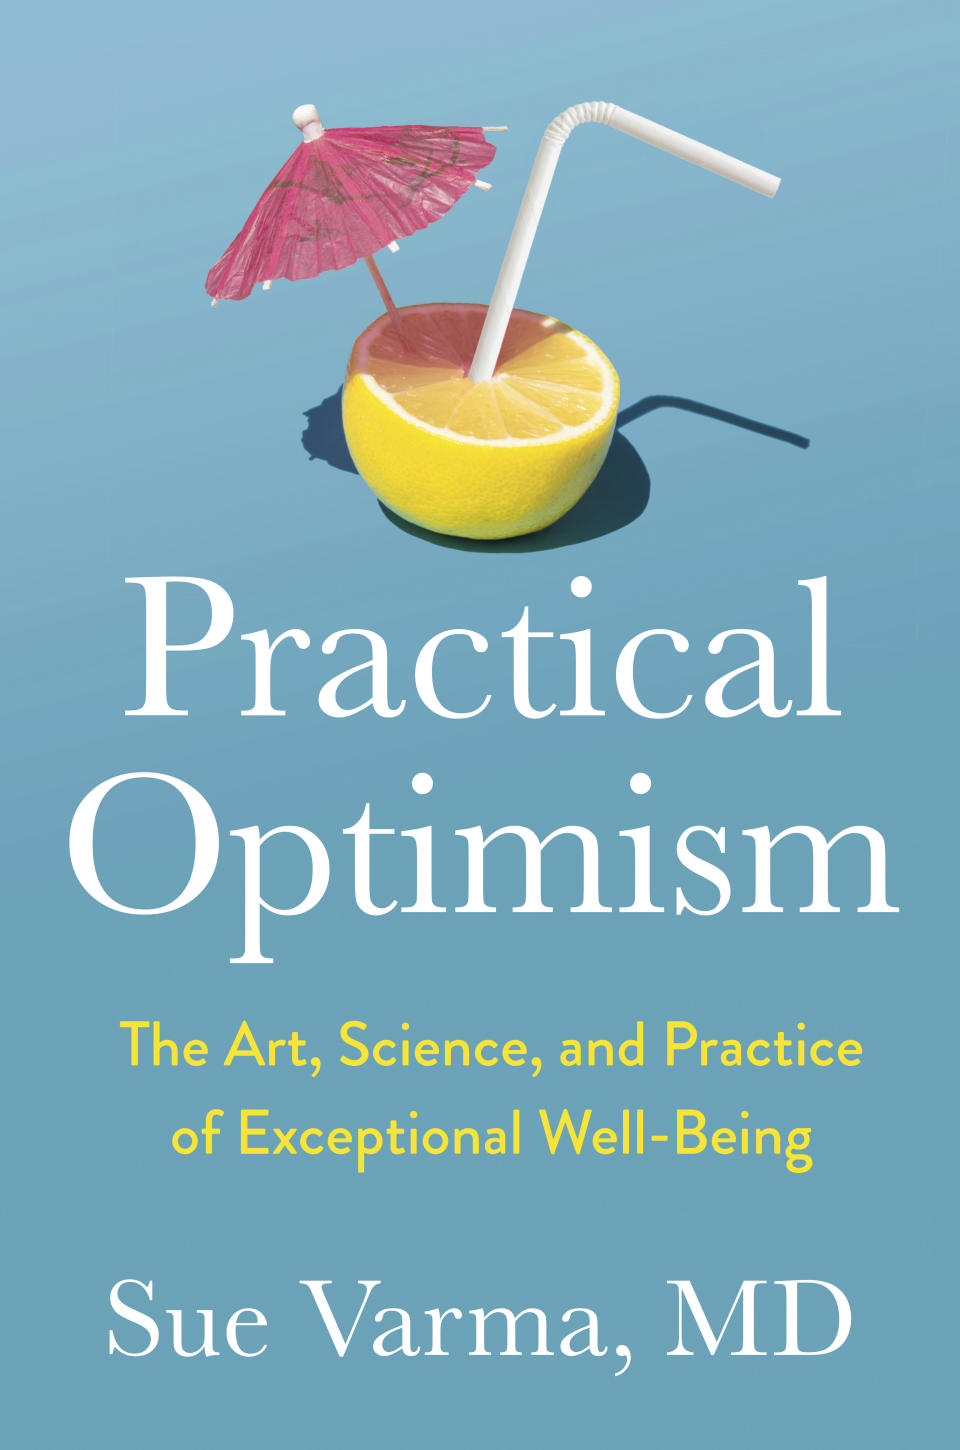 This cover image released by Avery Books shows "Practical Optimism: The Art, Science, and Practice of Exceptional Well-Being" by Sue Varma, MD. (Avery via AP)